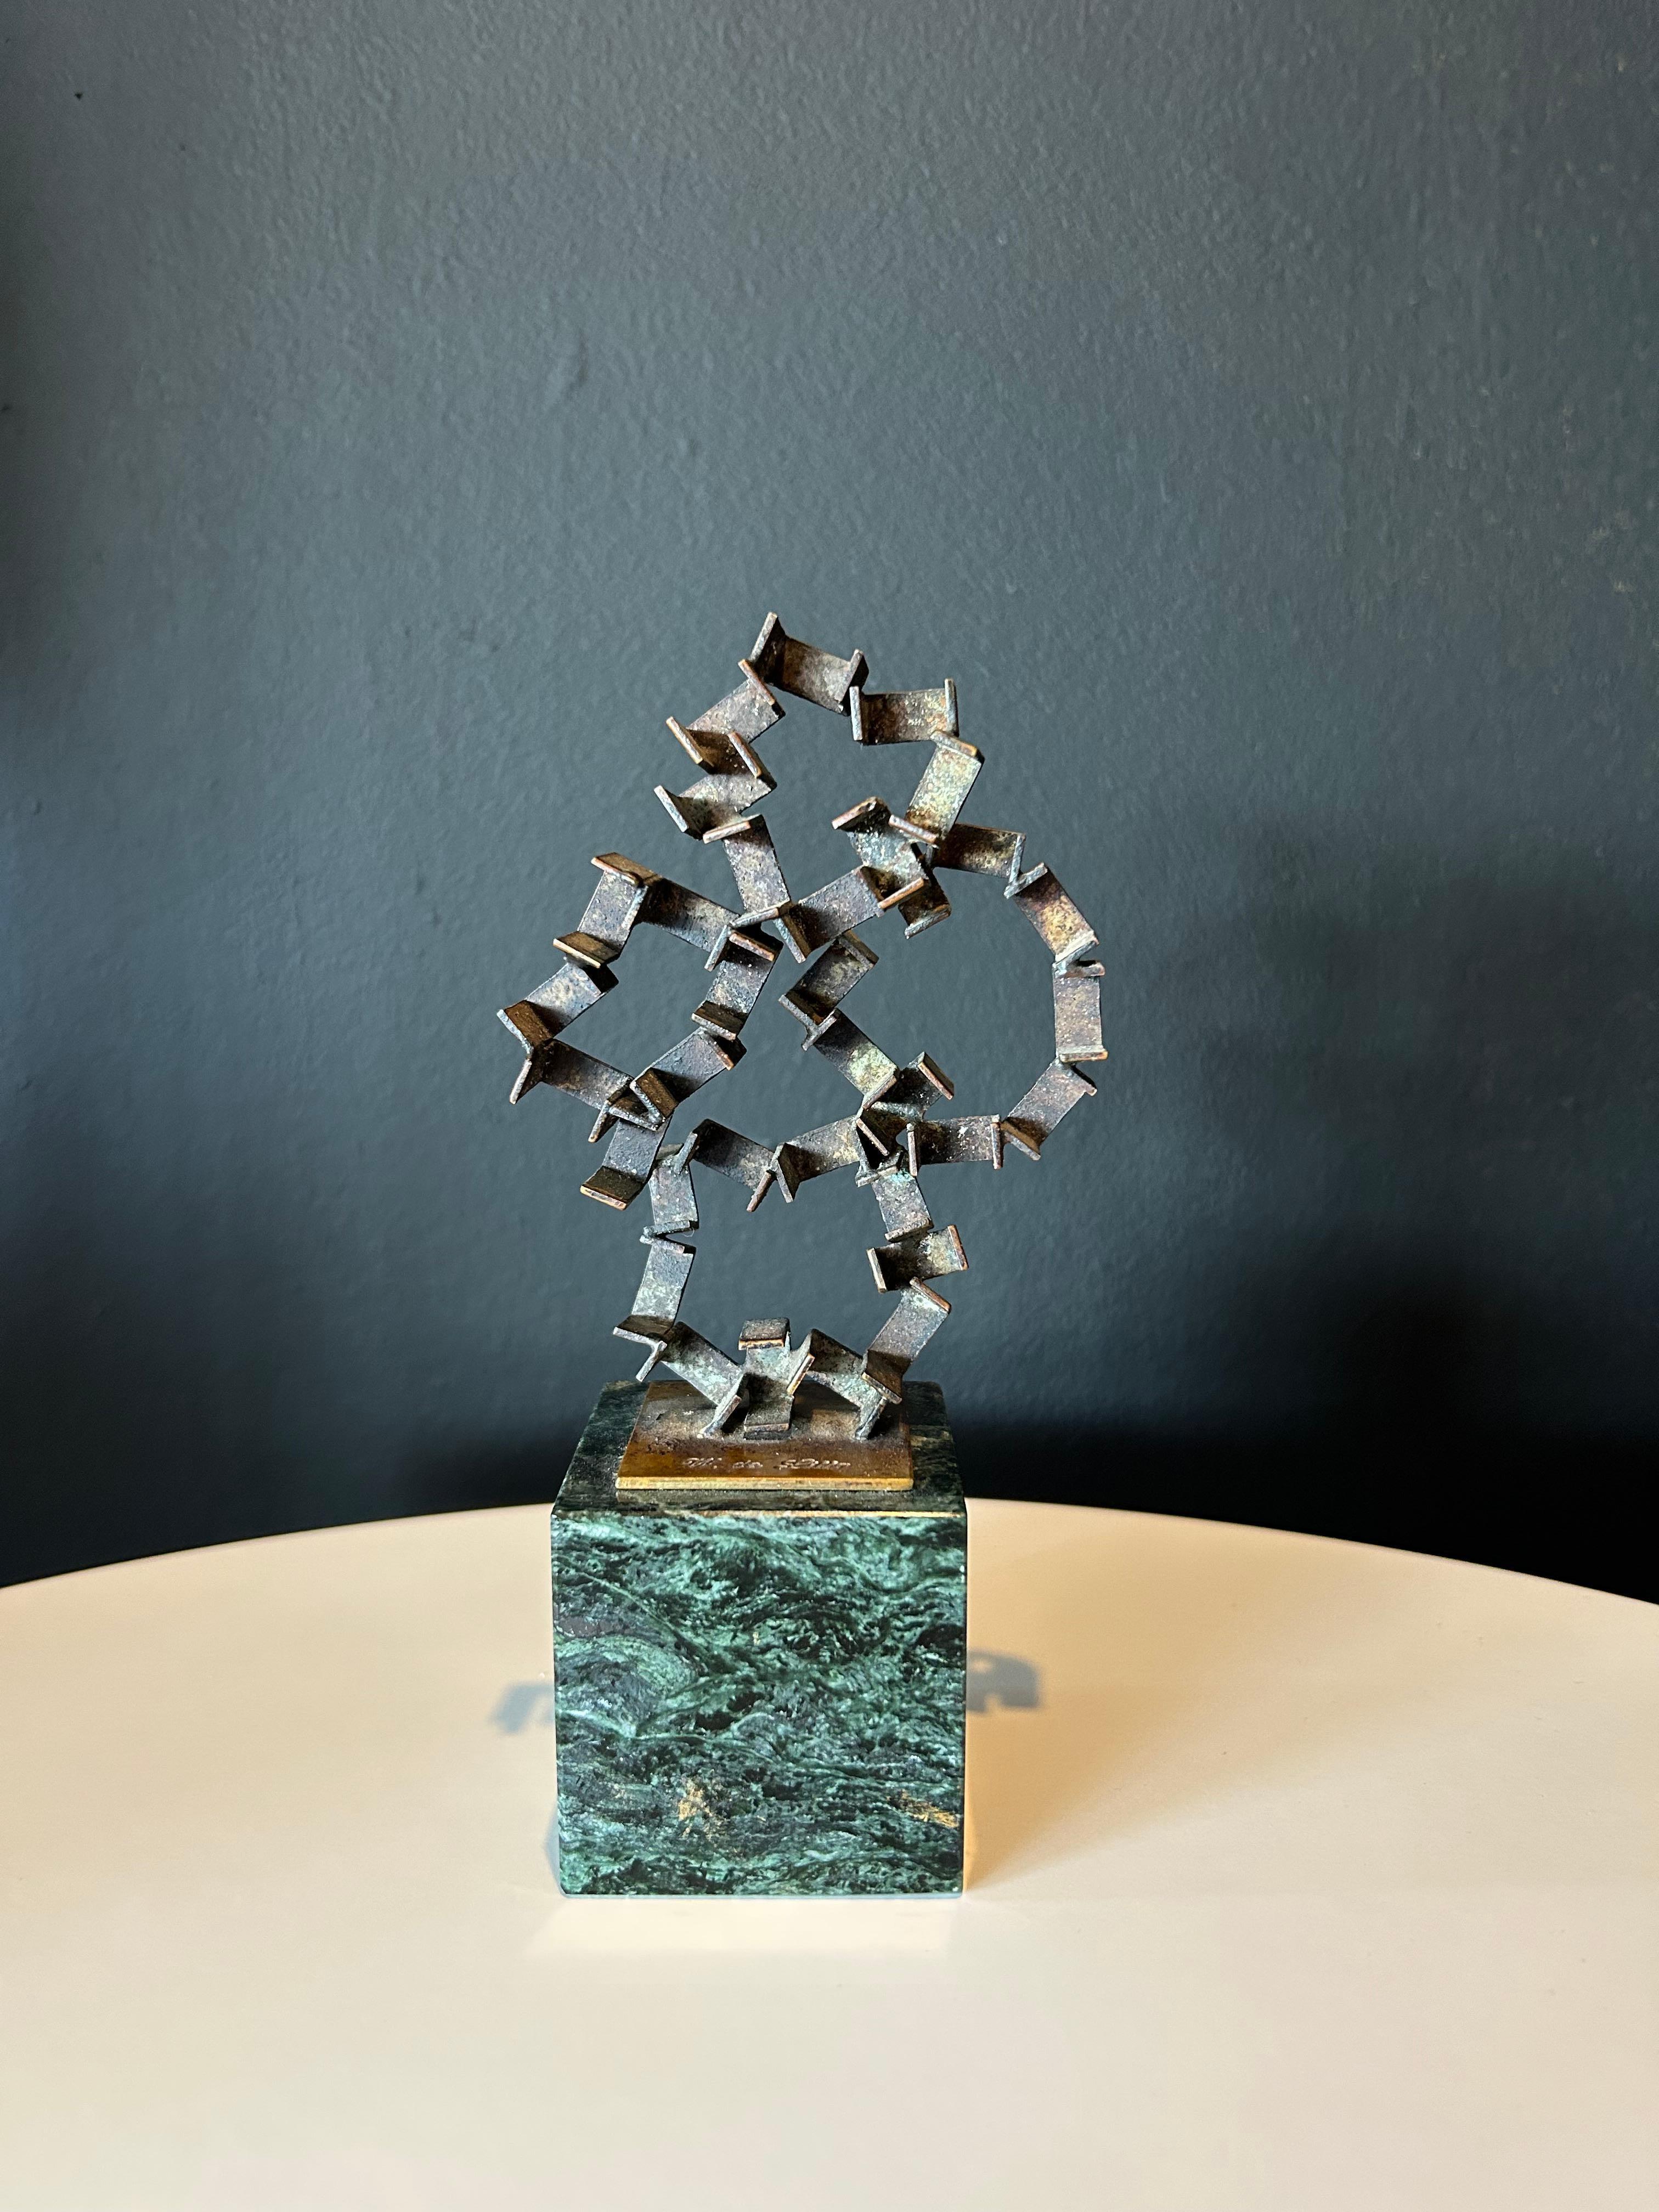  Bronze and marble abstract sculpture by jeweler and sculptor William De Lillo. These works (we have several by De Lillo) were done in Paris in the late 70’s.
